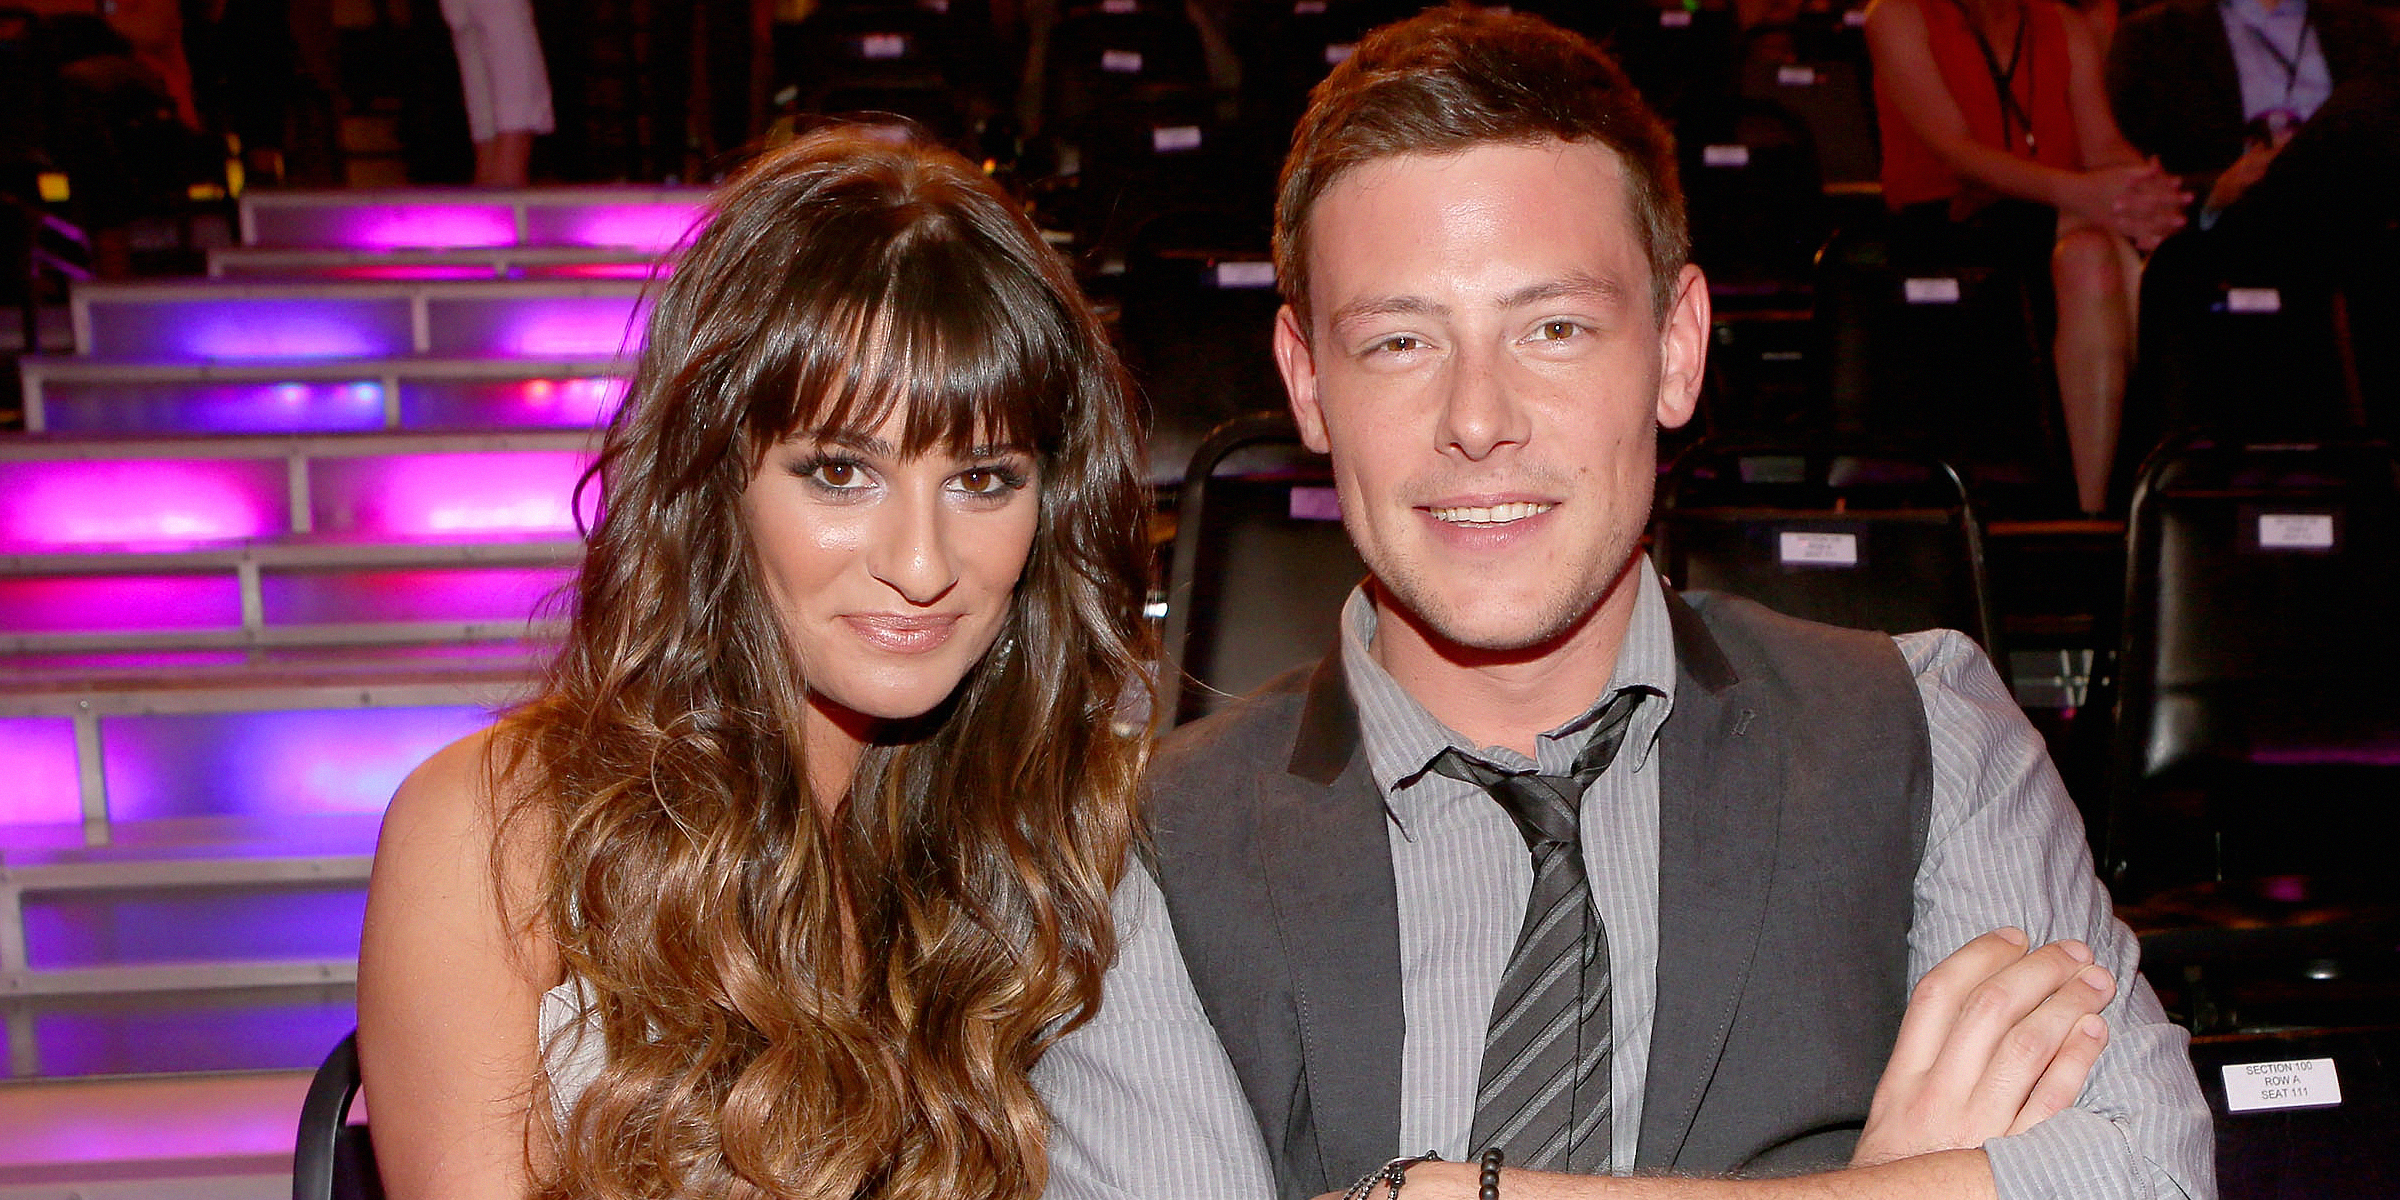 Lea Michele and Cory Monteith. | Source: Getty Images